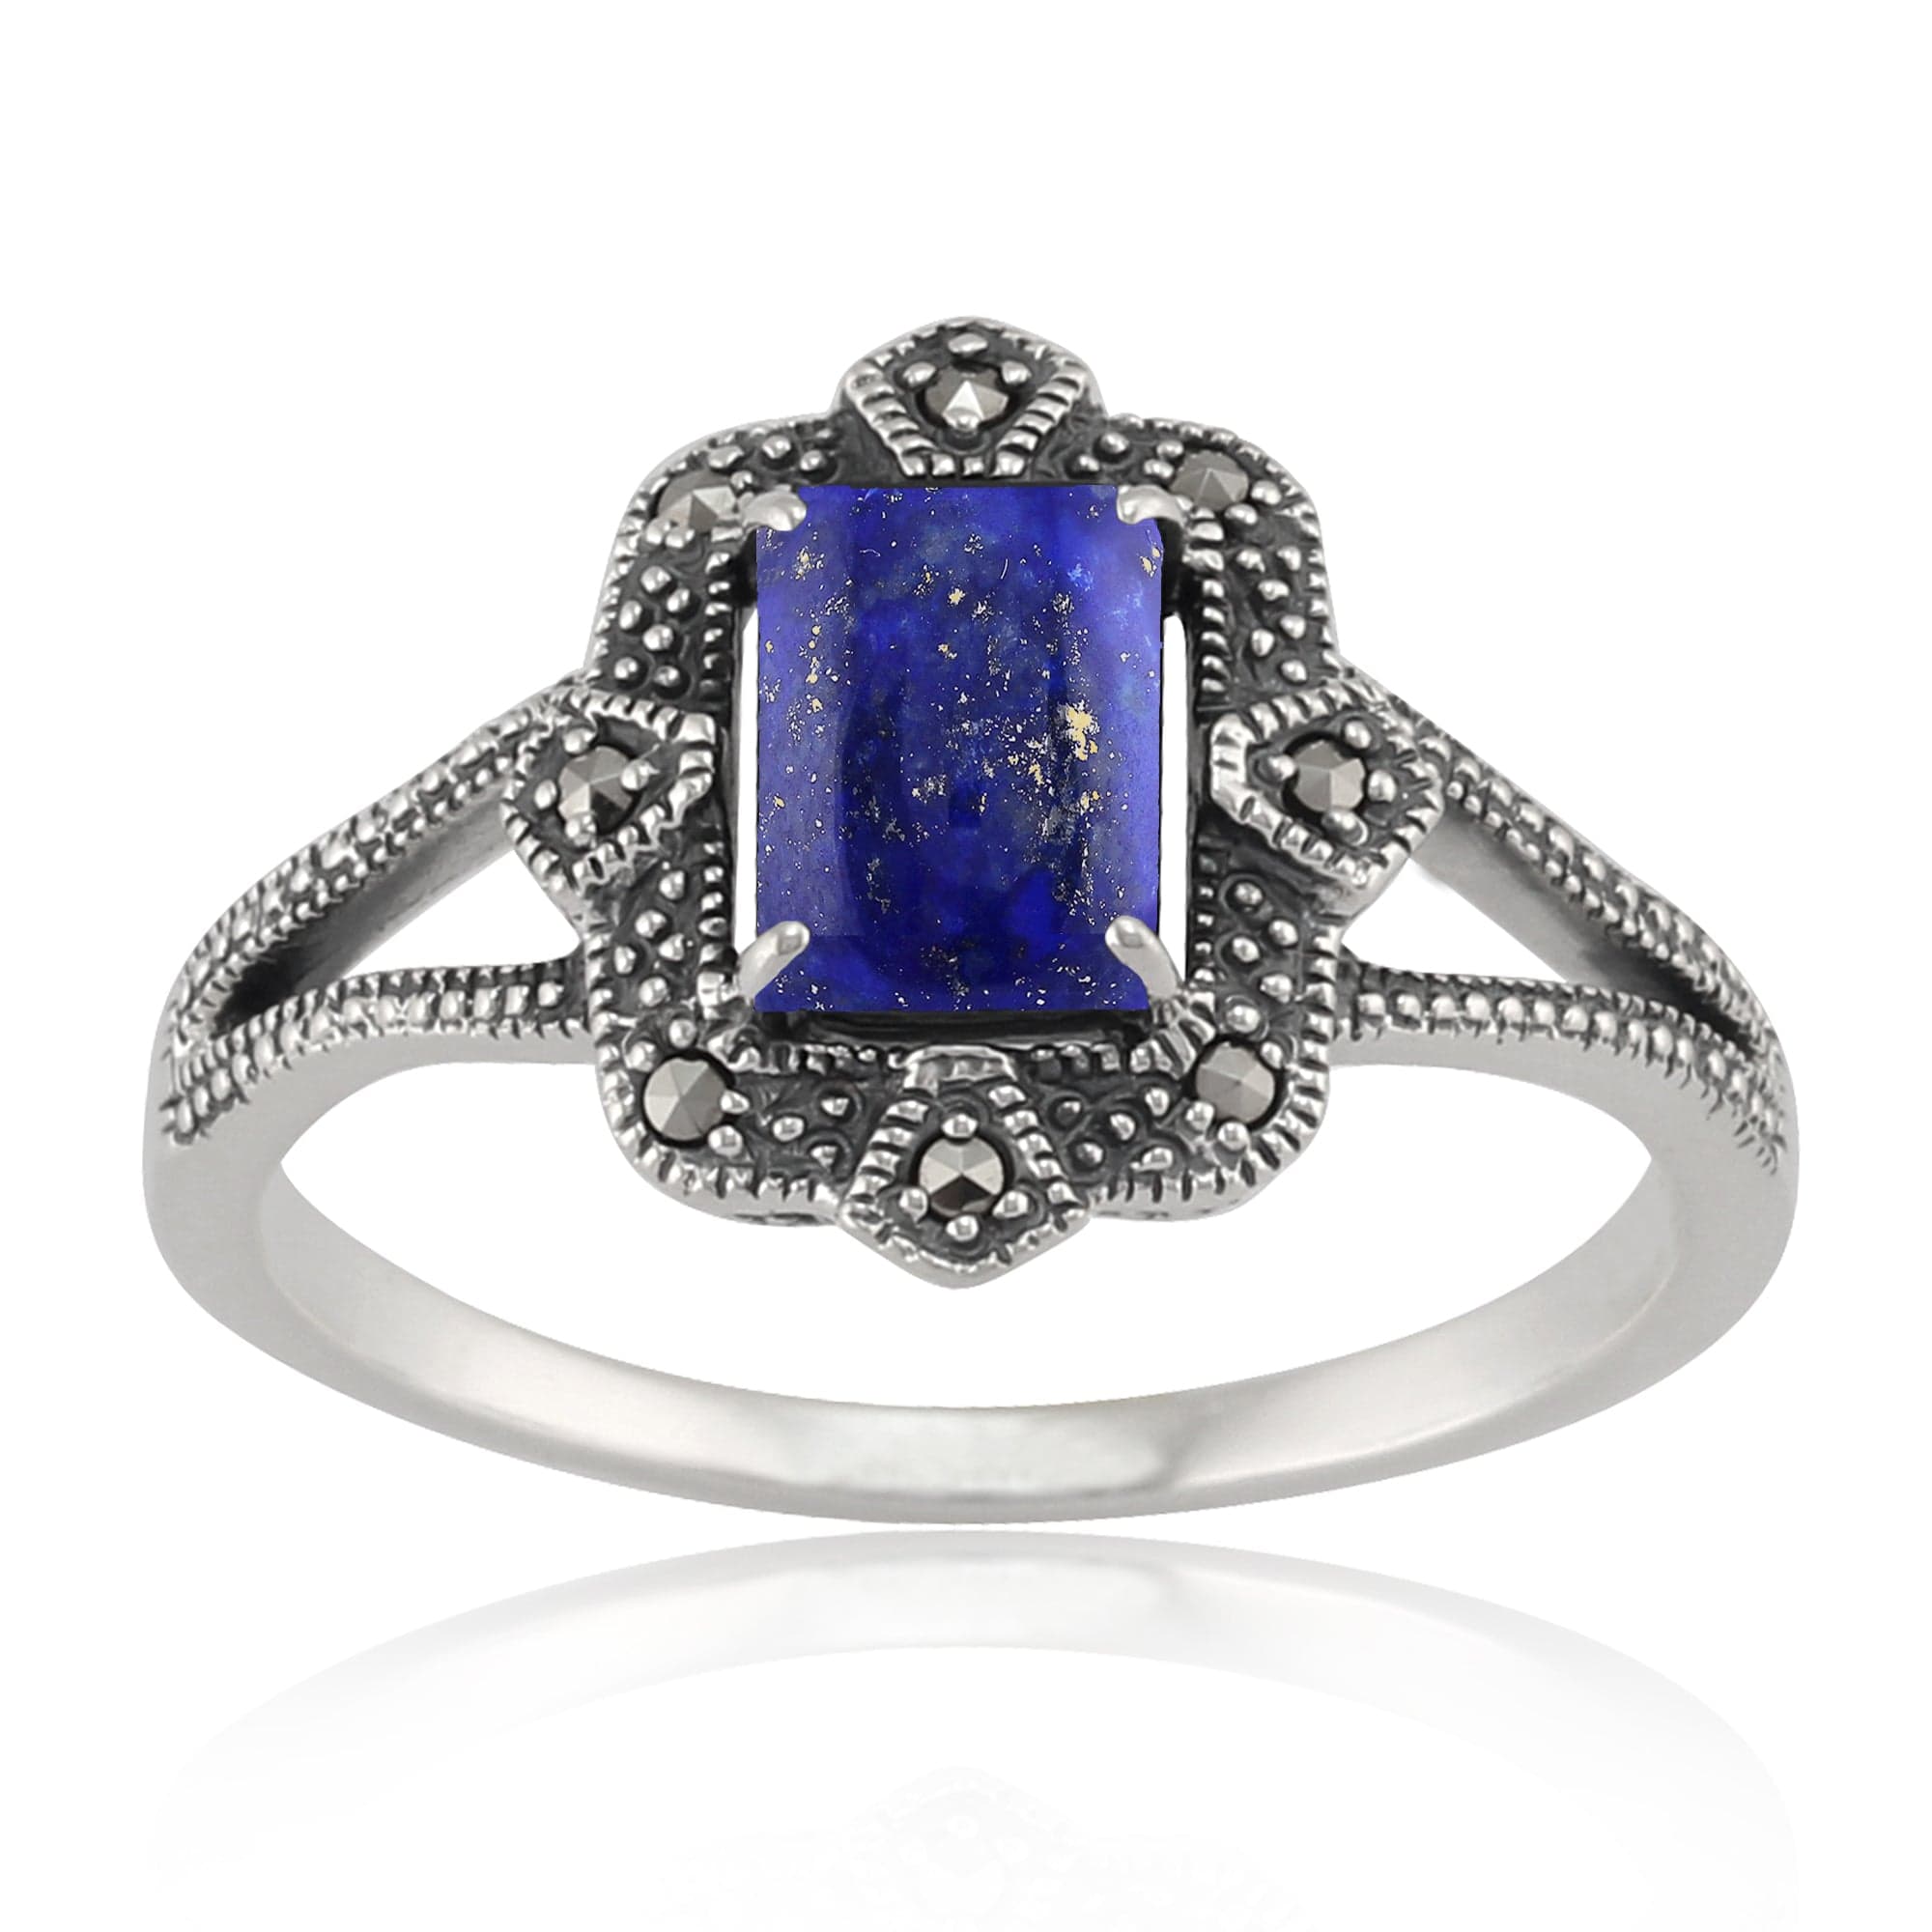 214R479008925 Art Deco Style Baguette Lapis Lazuli & Marcasite Ring in 925 Sterling Silver 1